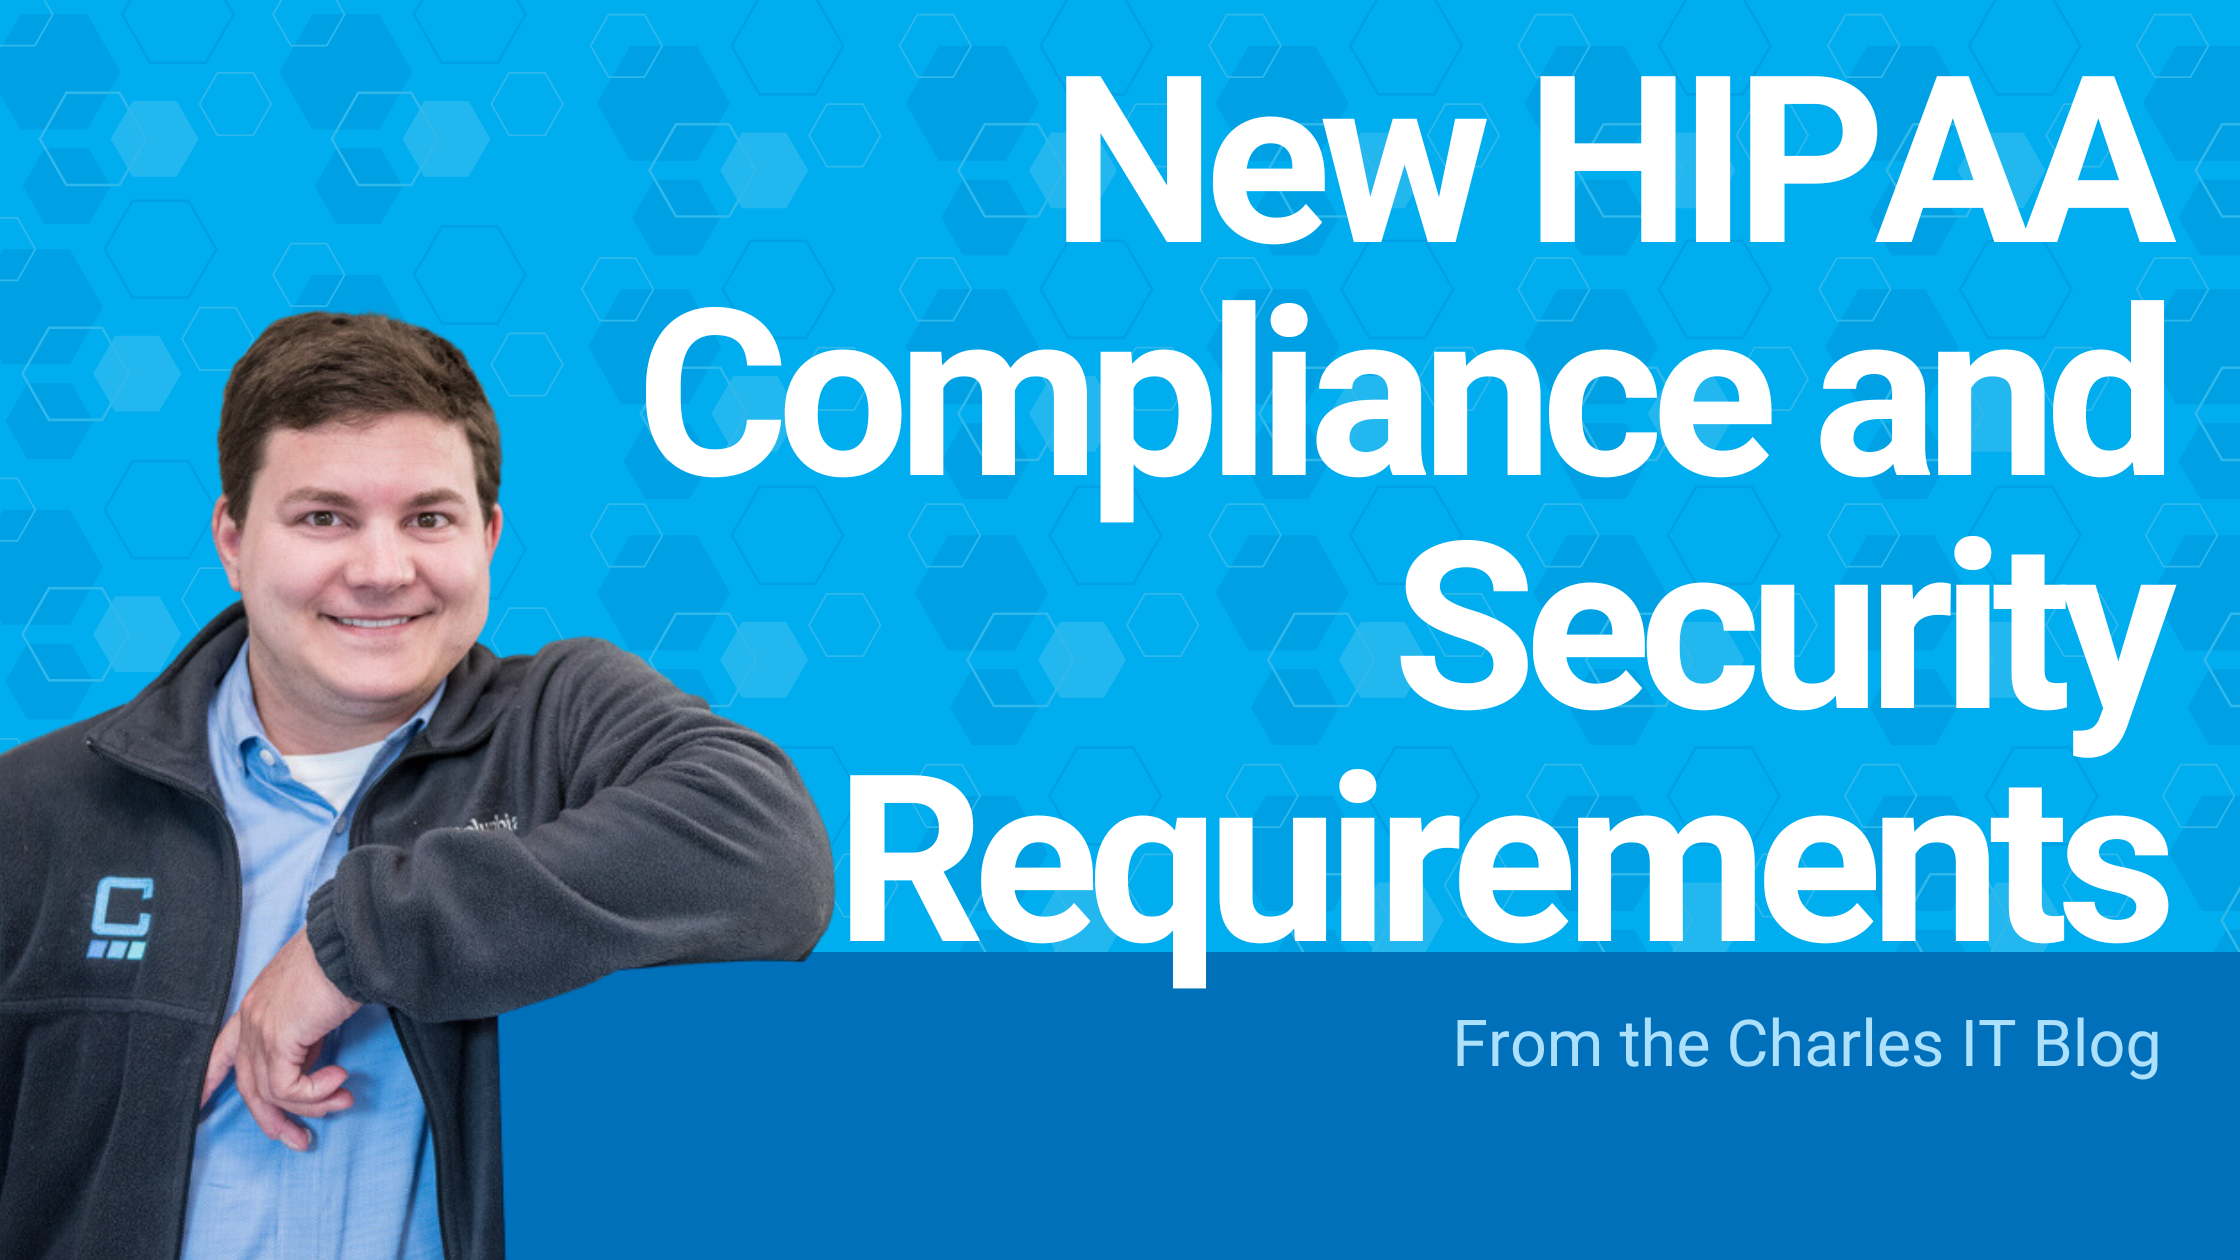 New HIPAA Compliance and Security Requirements